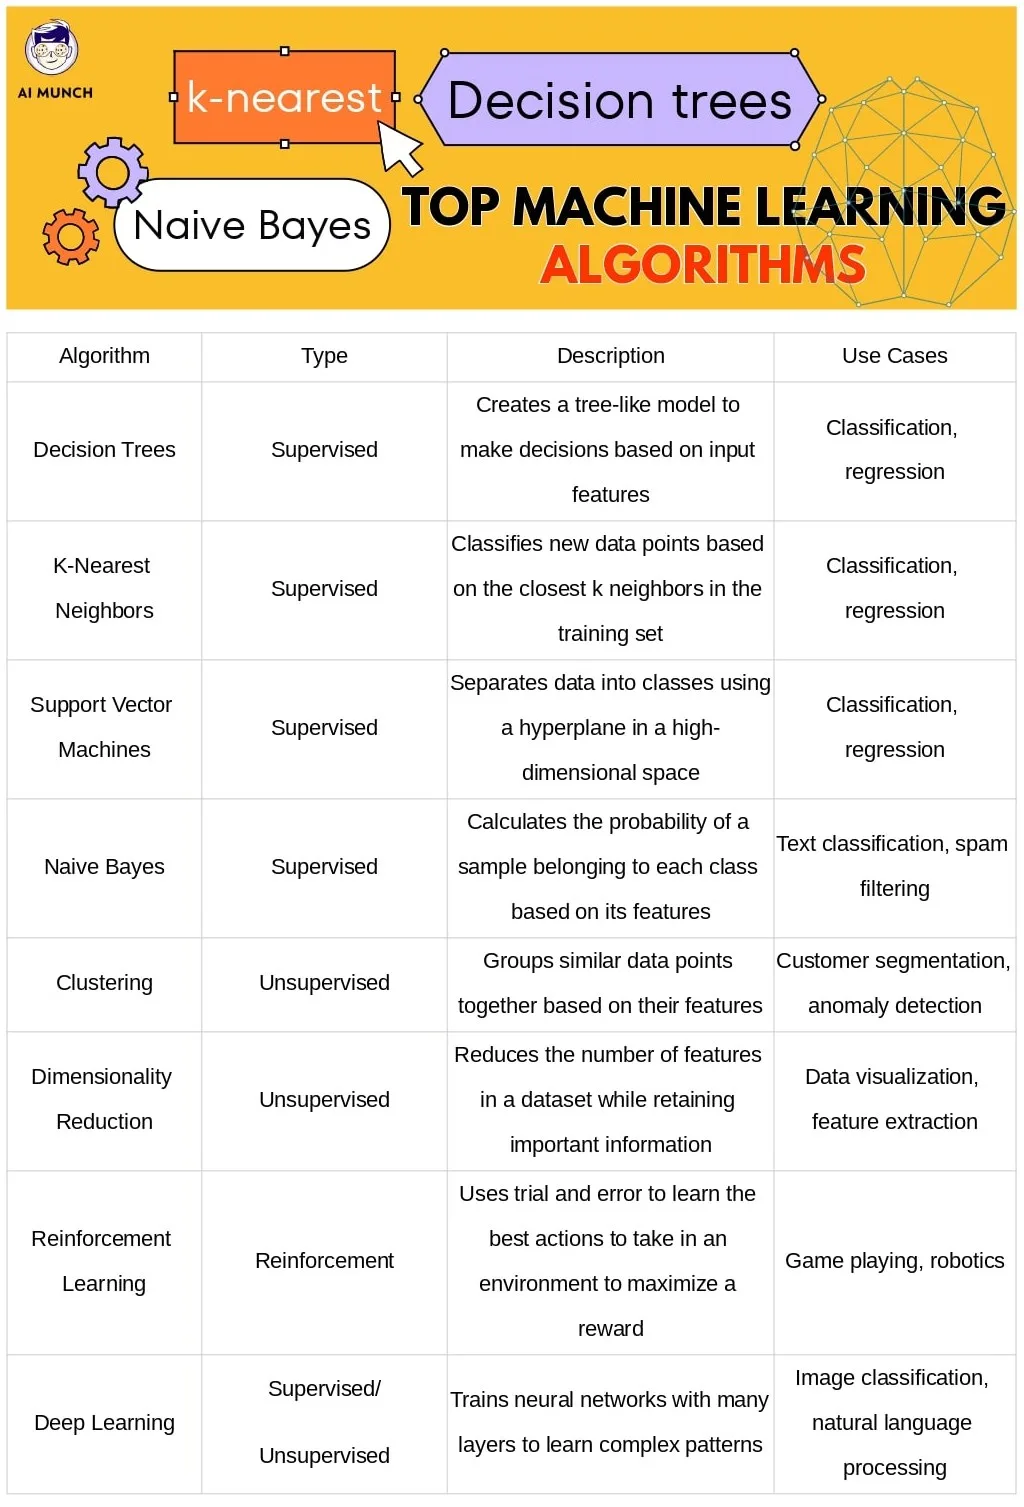 what are the Types of Machine Learning Algorithms